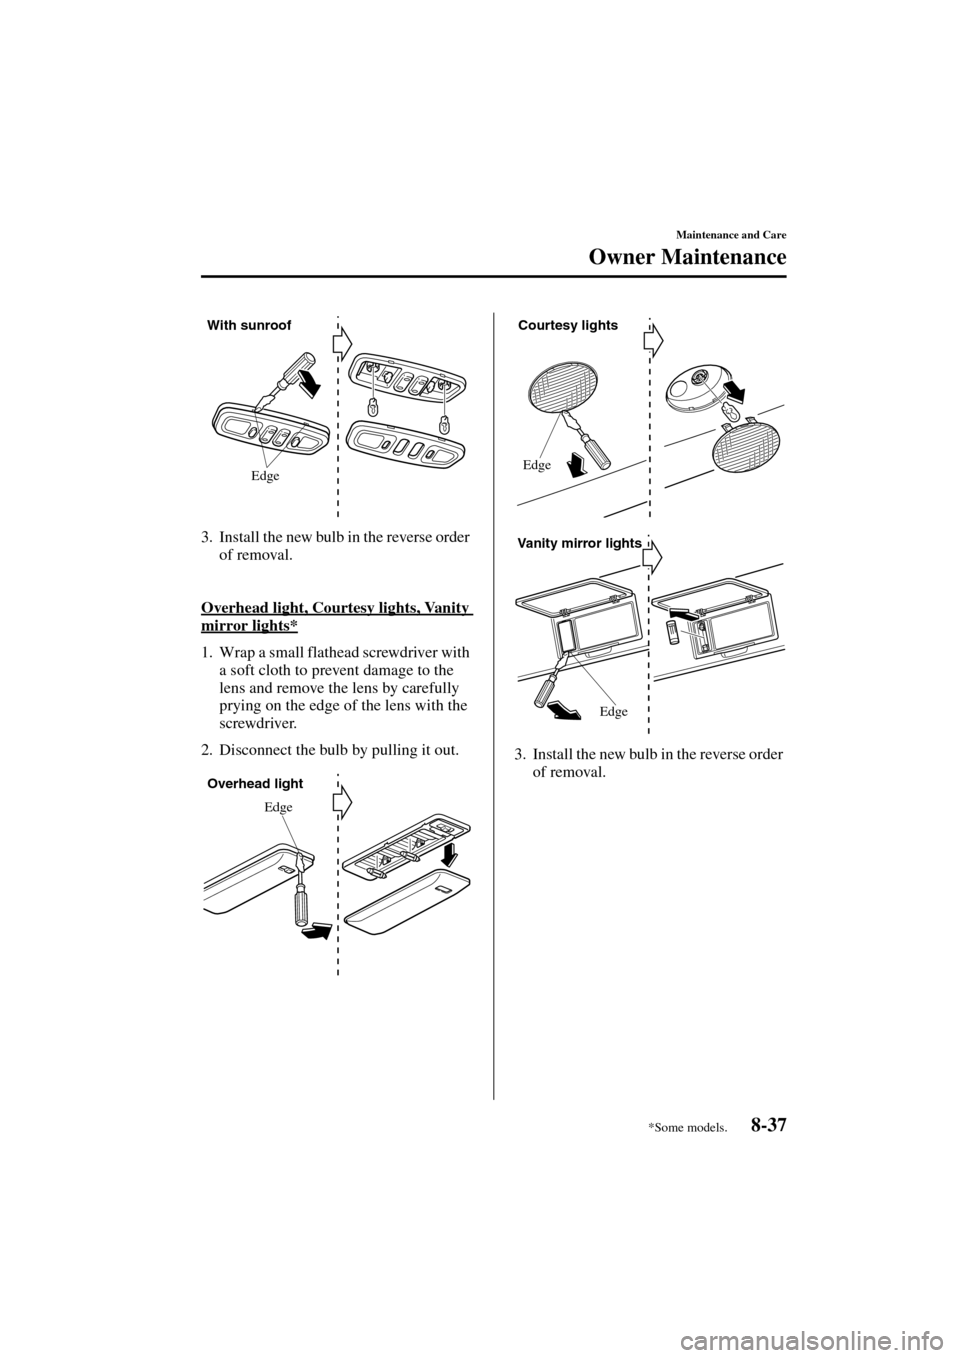 MAZDA MODEL MPV 2004  Owners Manual (in English) 8-37
Maintenance and Care
Owner Maintenance
Form No. 8S06-EA-03H
3. Install the new bulb in the reverse order 
of removal.
Overhead light, Courtesy lights, Vanity 
mirror lights*
1. Wrap a small flath